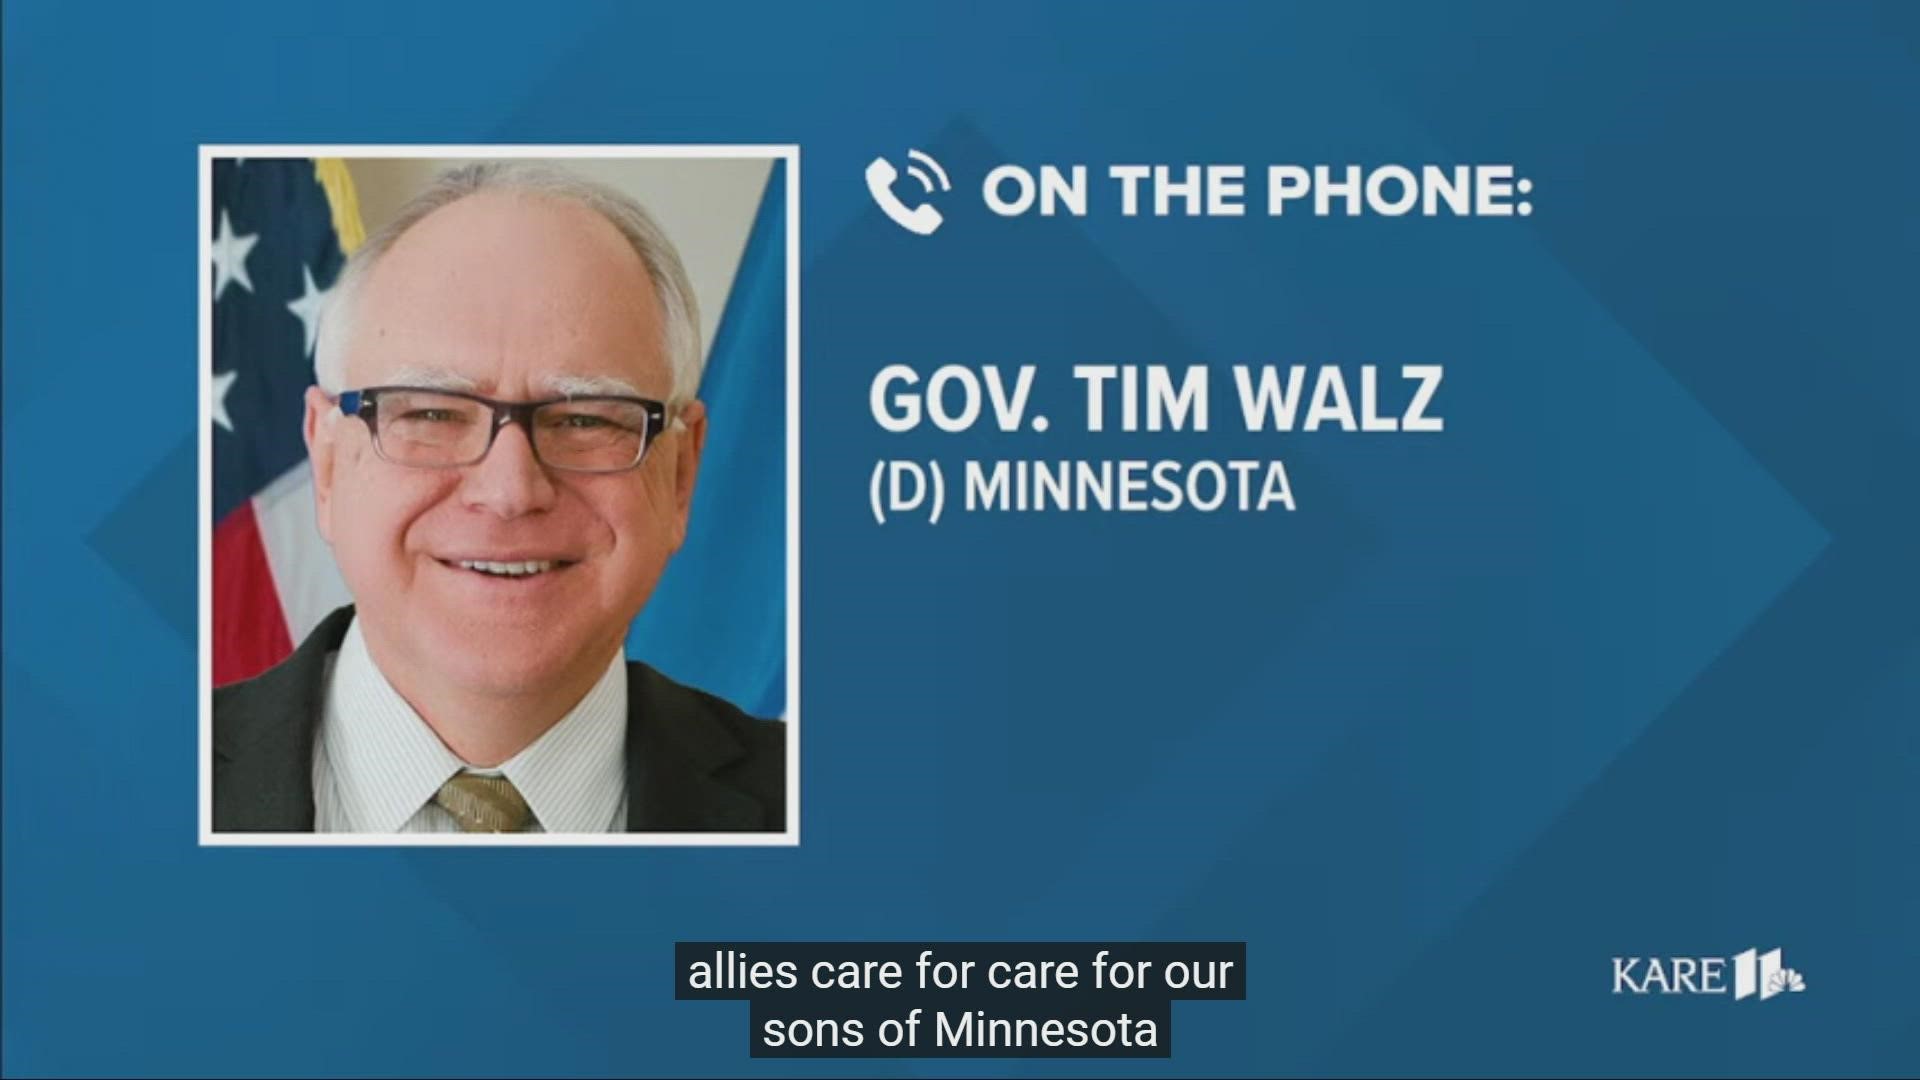 Governor Tim Walz briefed reporters on Minnesota's influx of COVID cases and the arrival of federal medical teams to help overburdened hospitals.